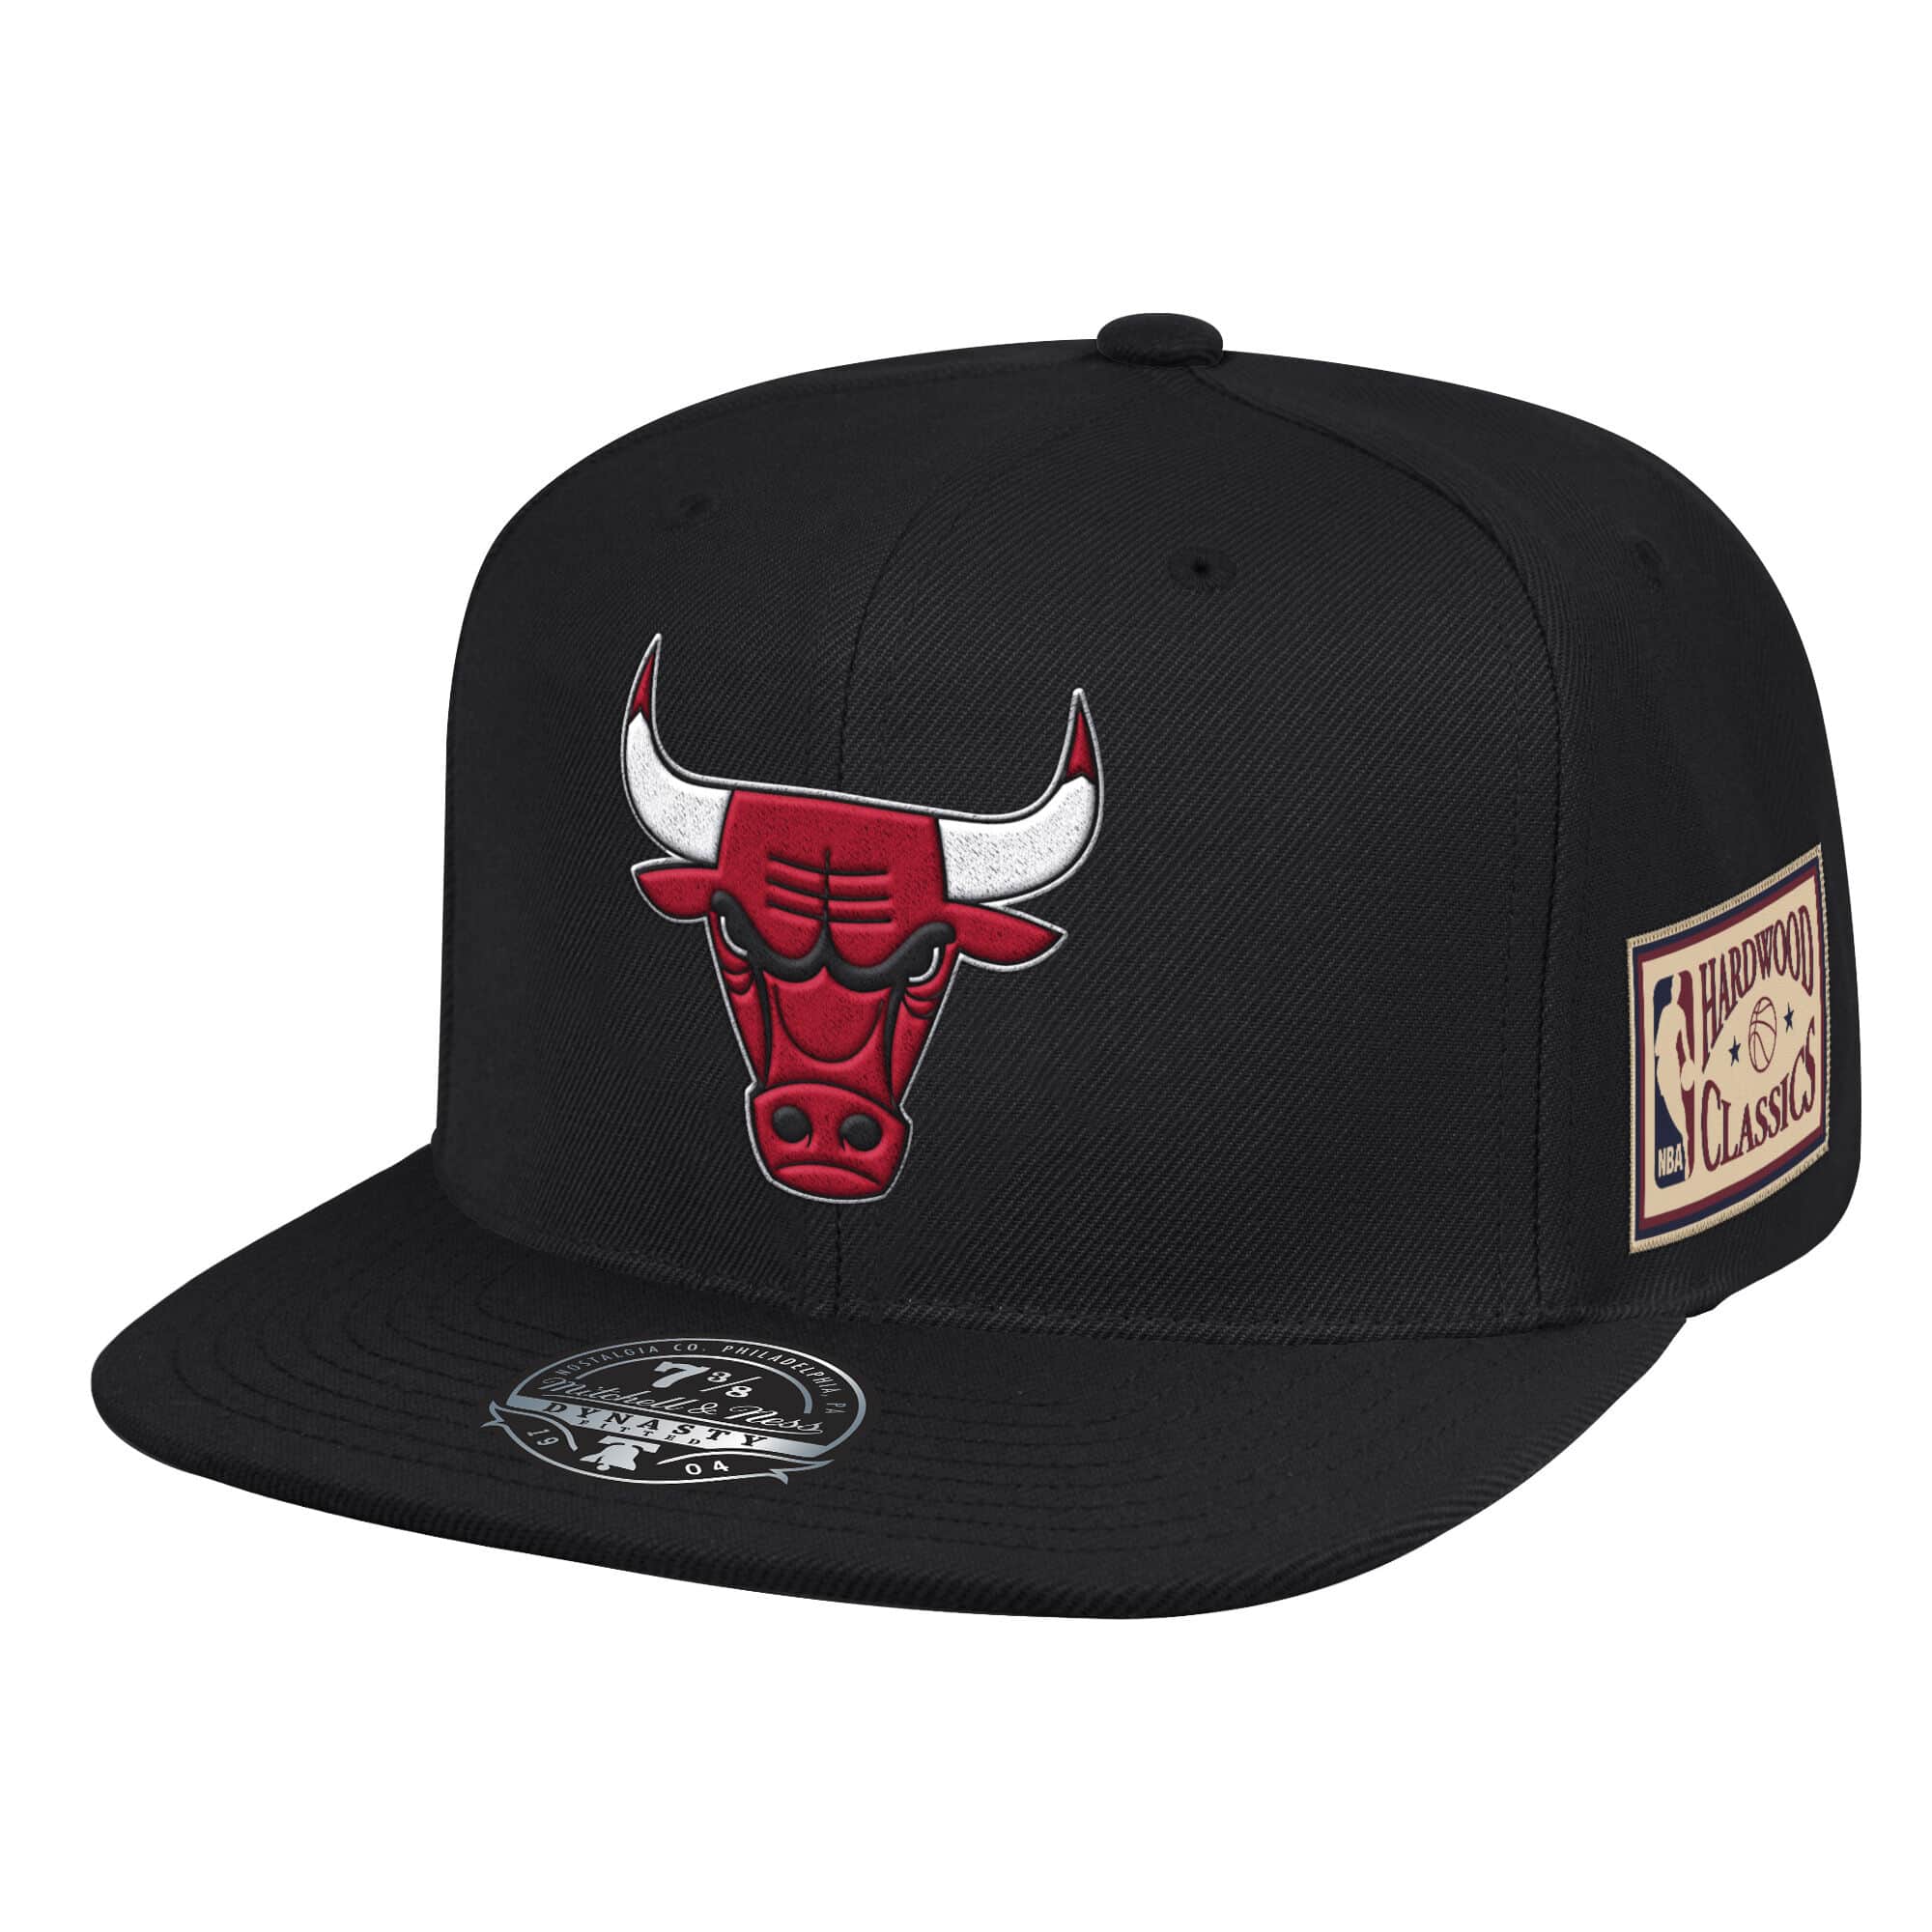 Mitchell & Ness 1991 NBA Finals Champ Patch Fitted HWC Chicago Bulls